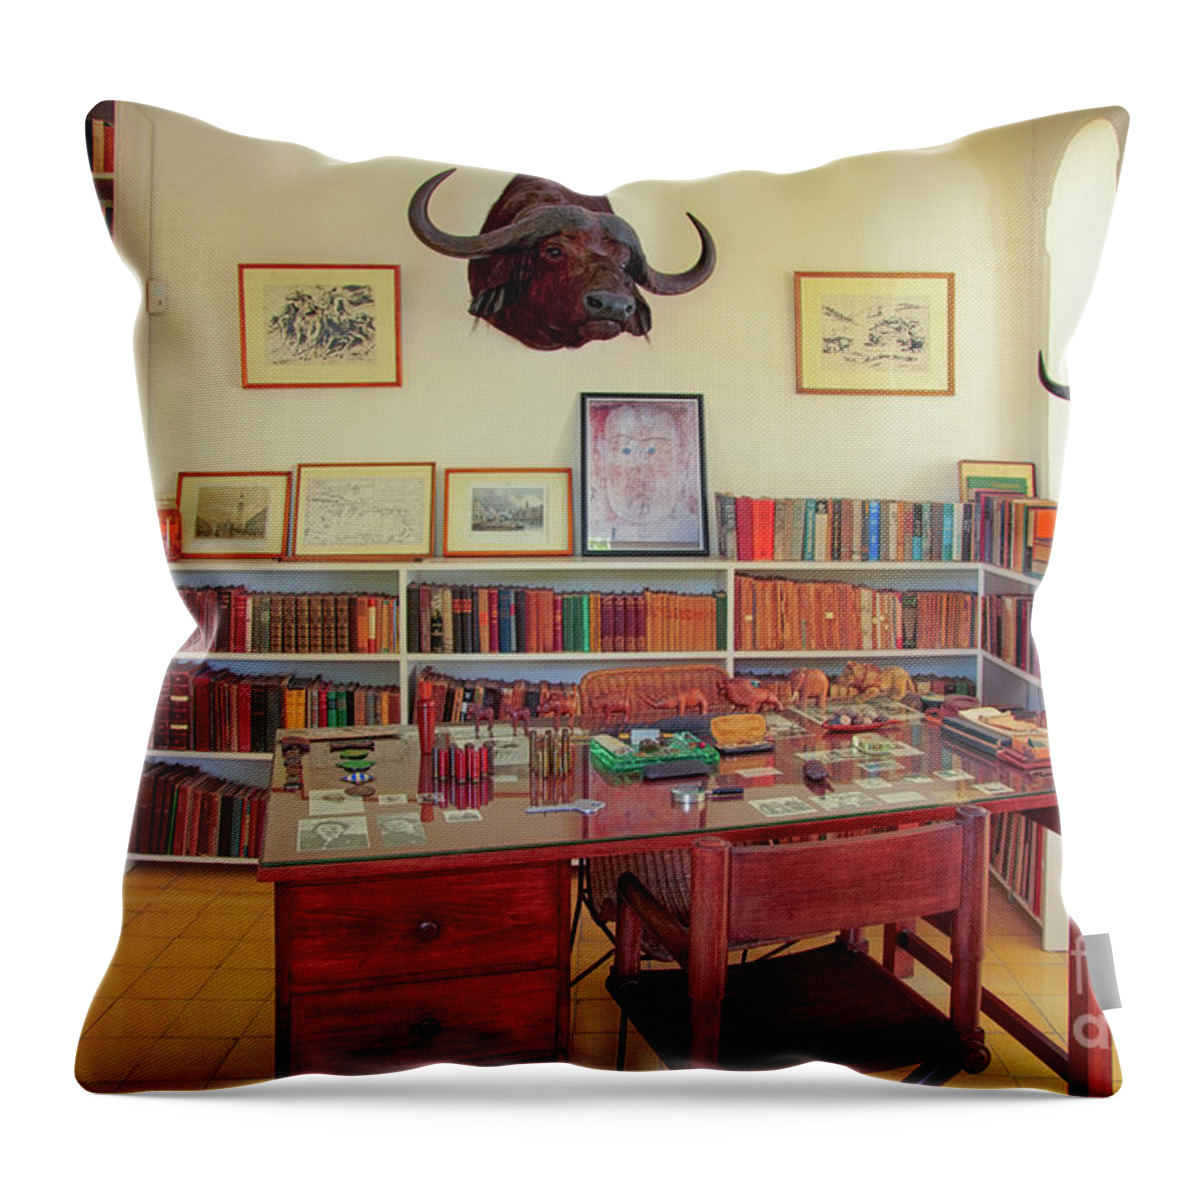 Tranquility Throw Pillow featuring the photograph Hemingways' Cuba House No. 2 by Craig J Satterlee